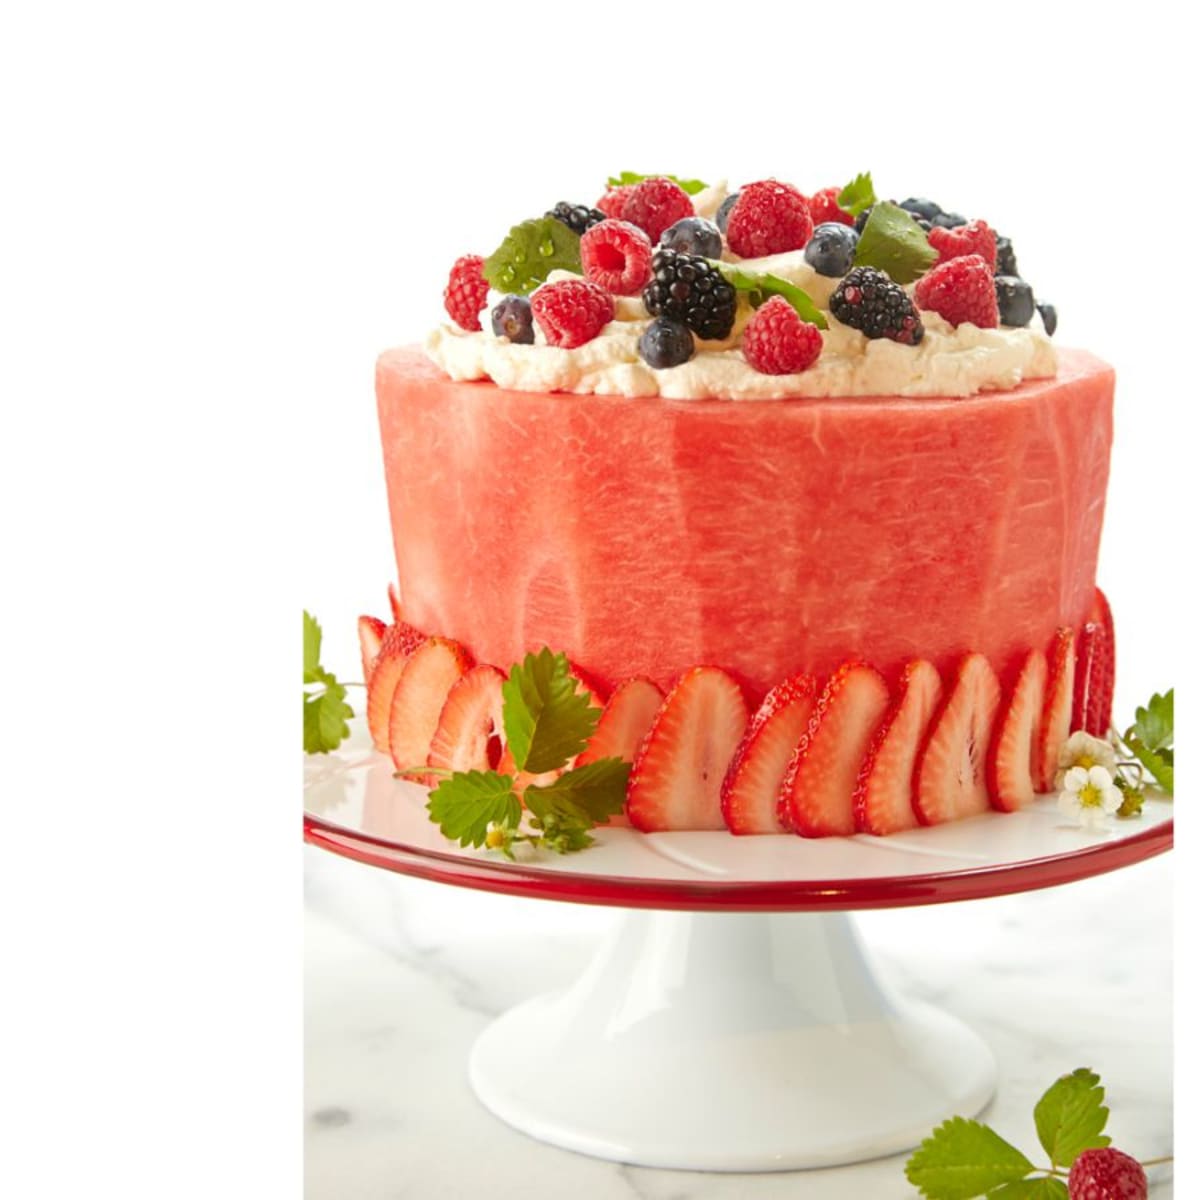 Healthy, Fresh Watermelon and Fruit in a Cake Shape | Tikkido.com